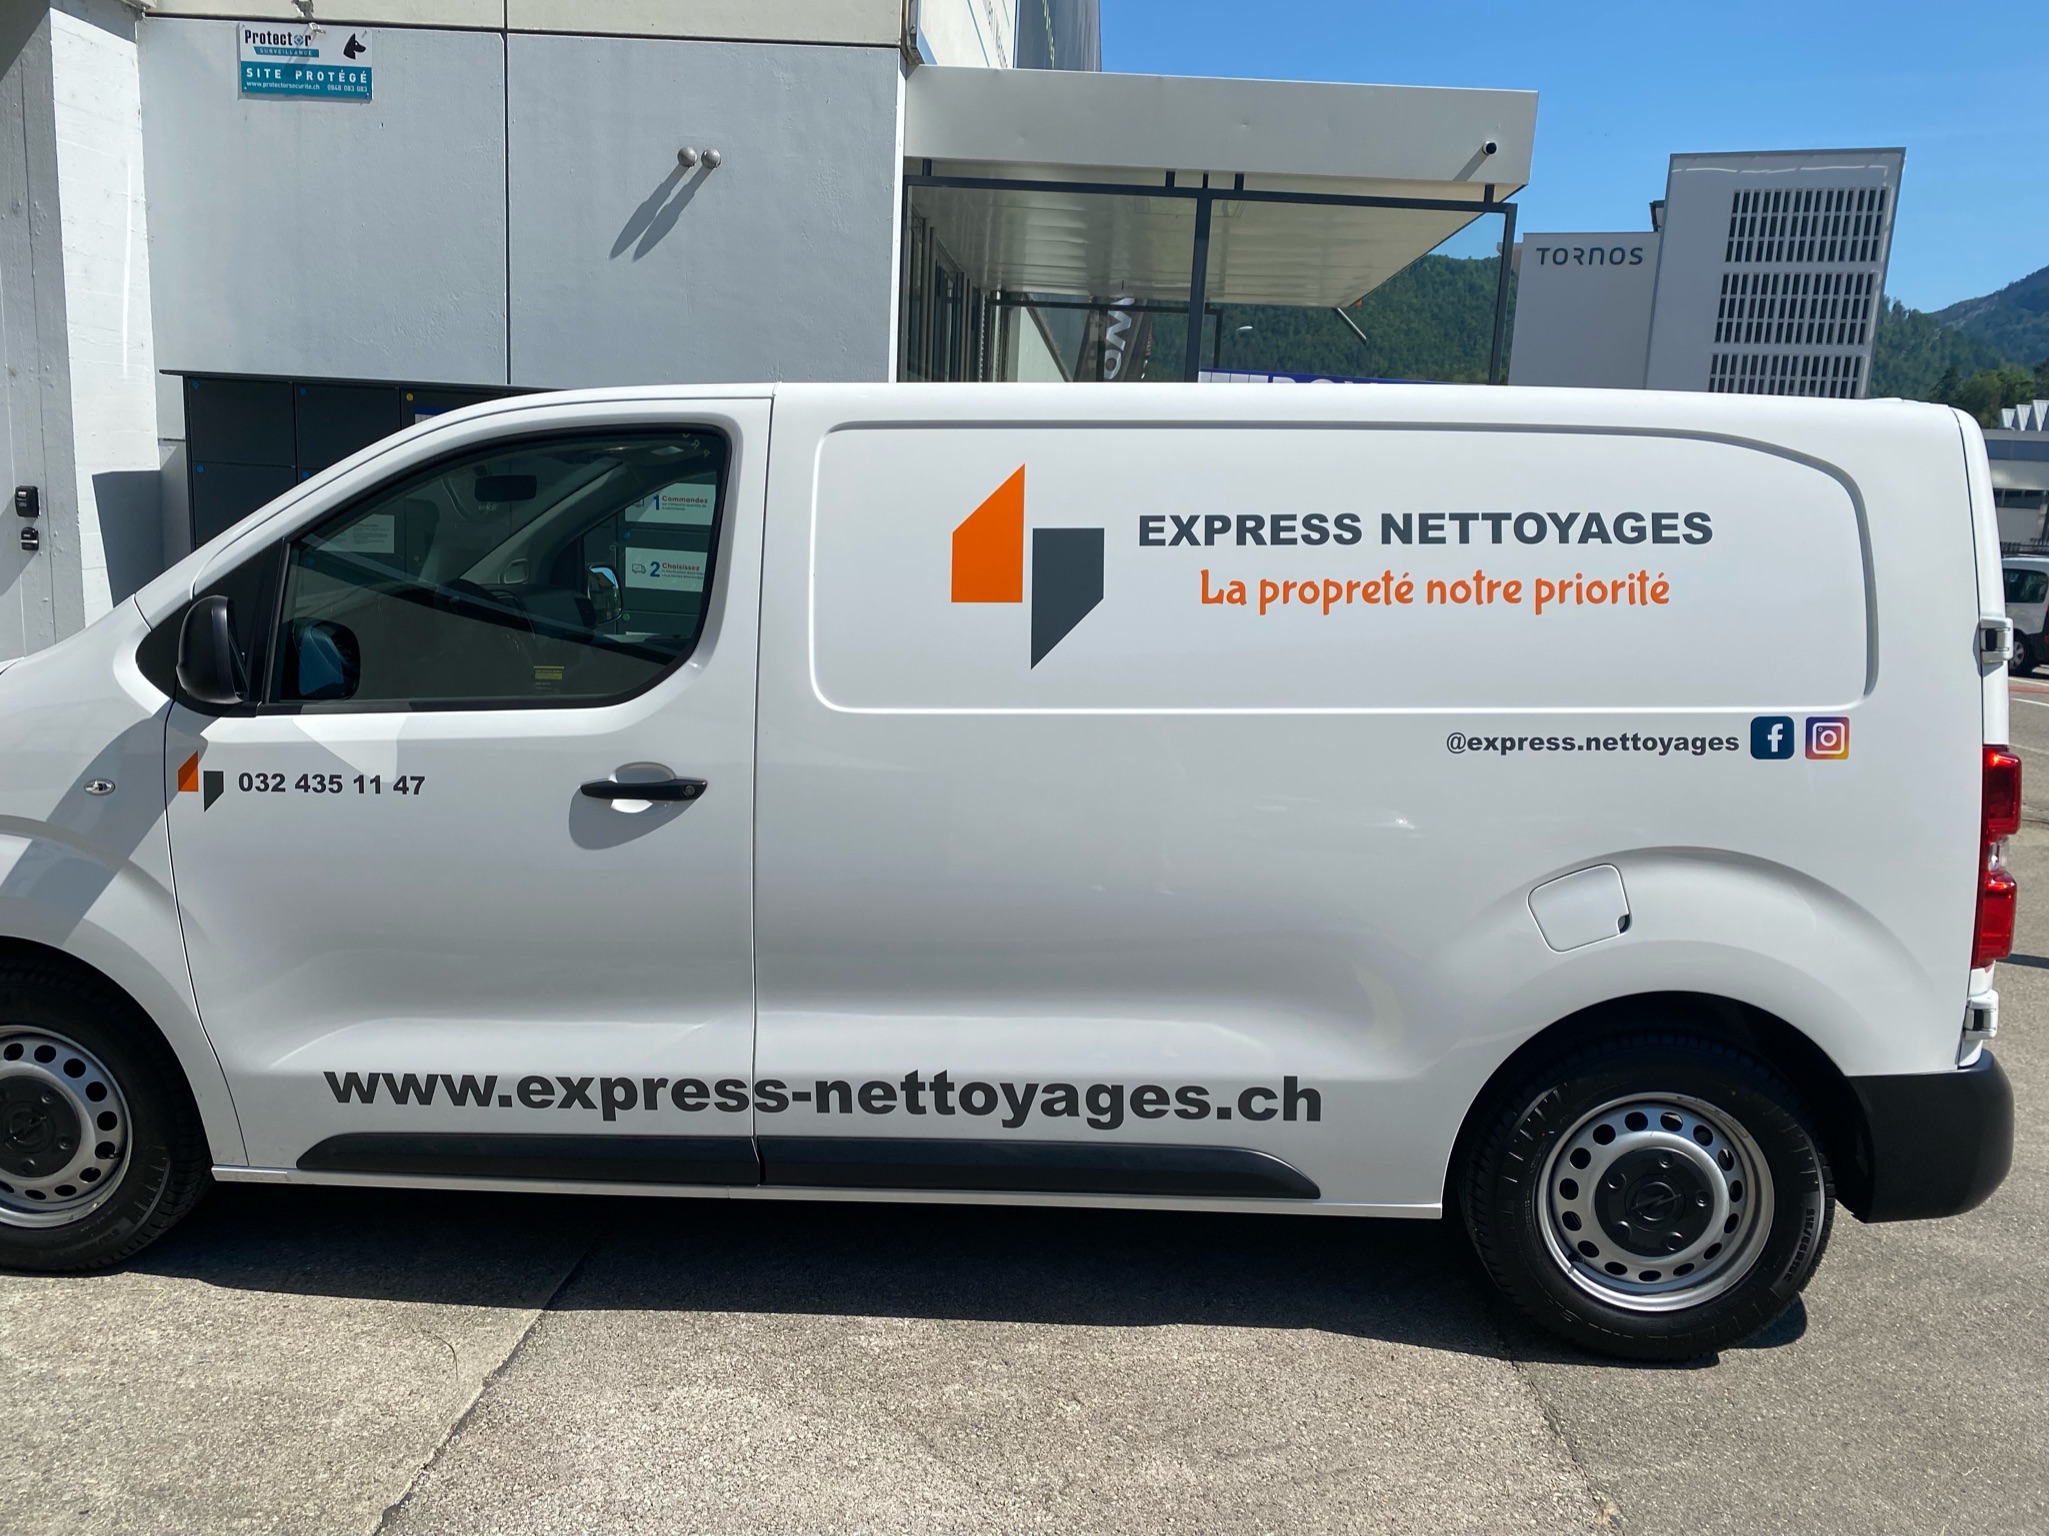 Express Nettoyages